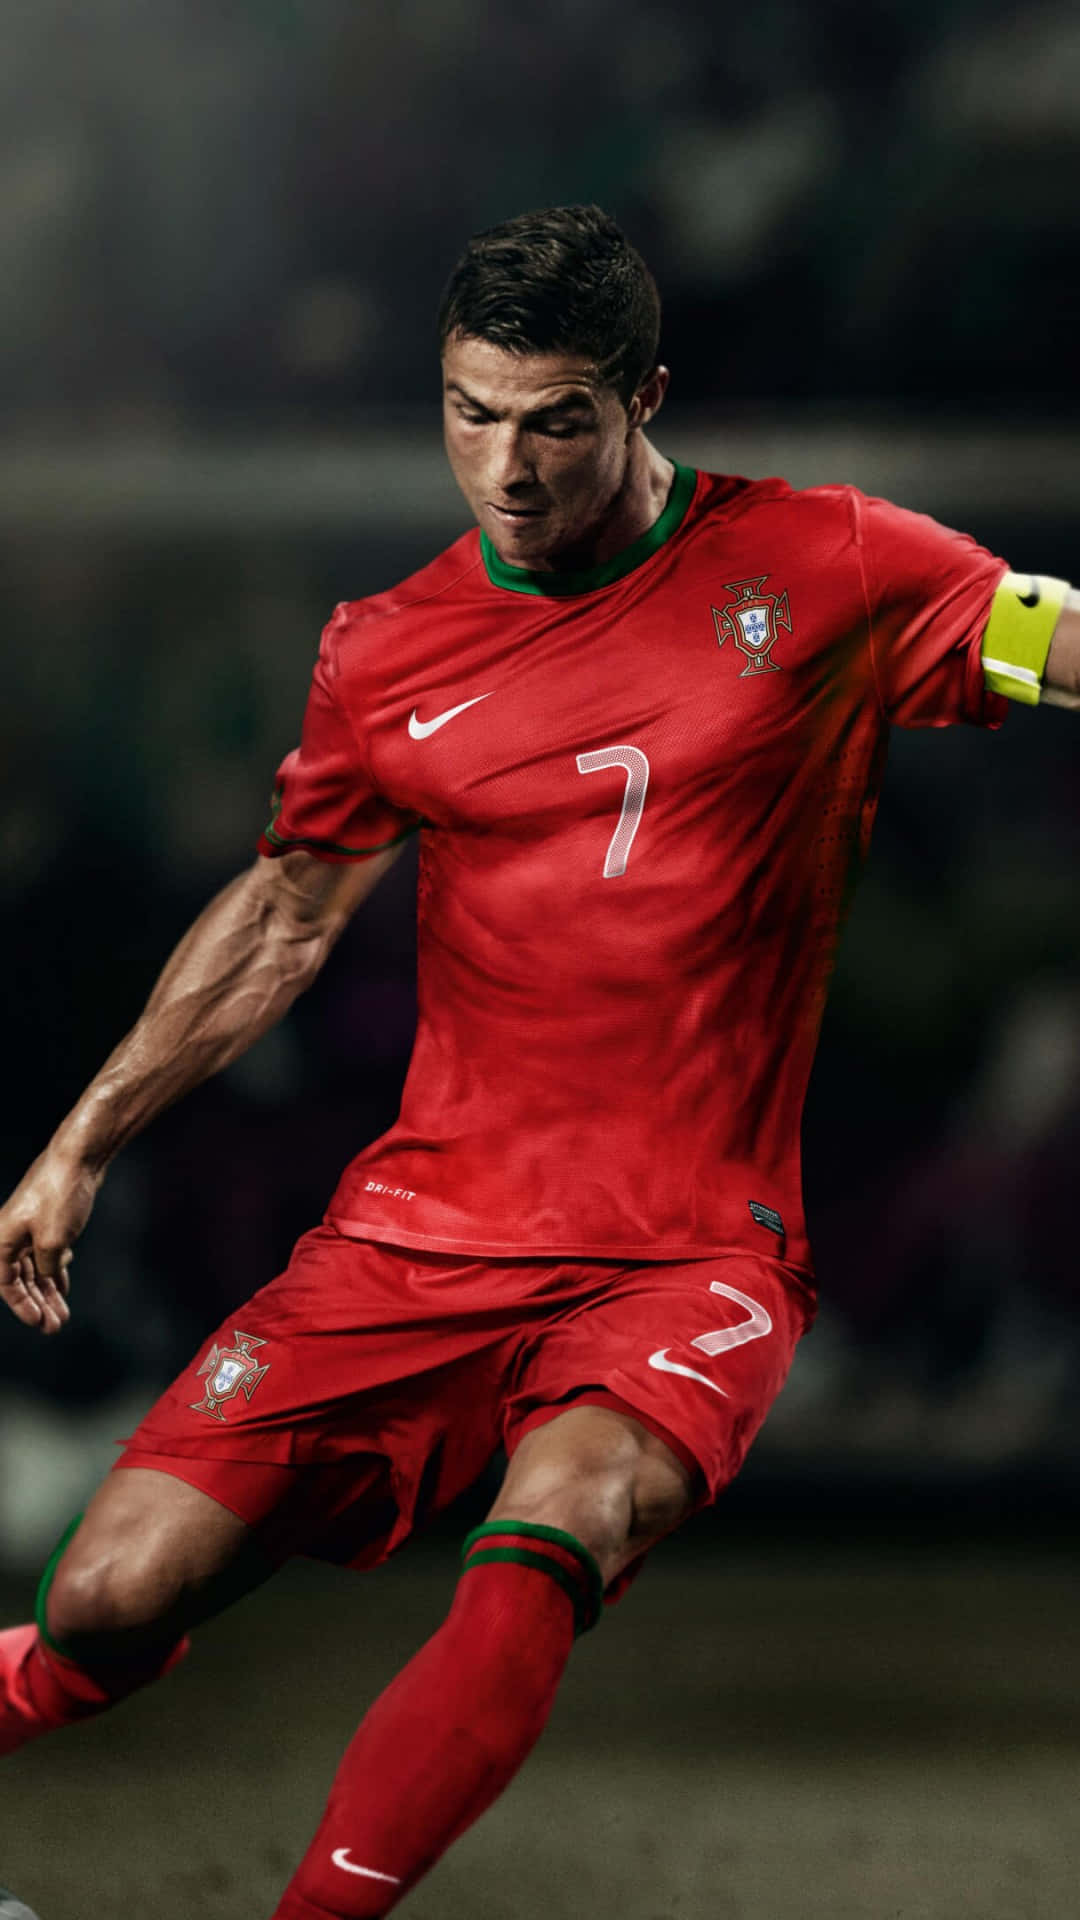 Cristiano Ronaldo in action on the soccer field